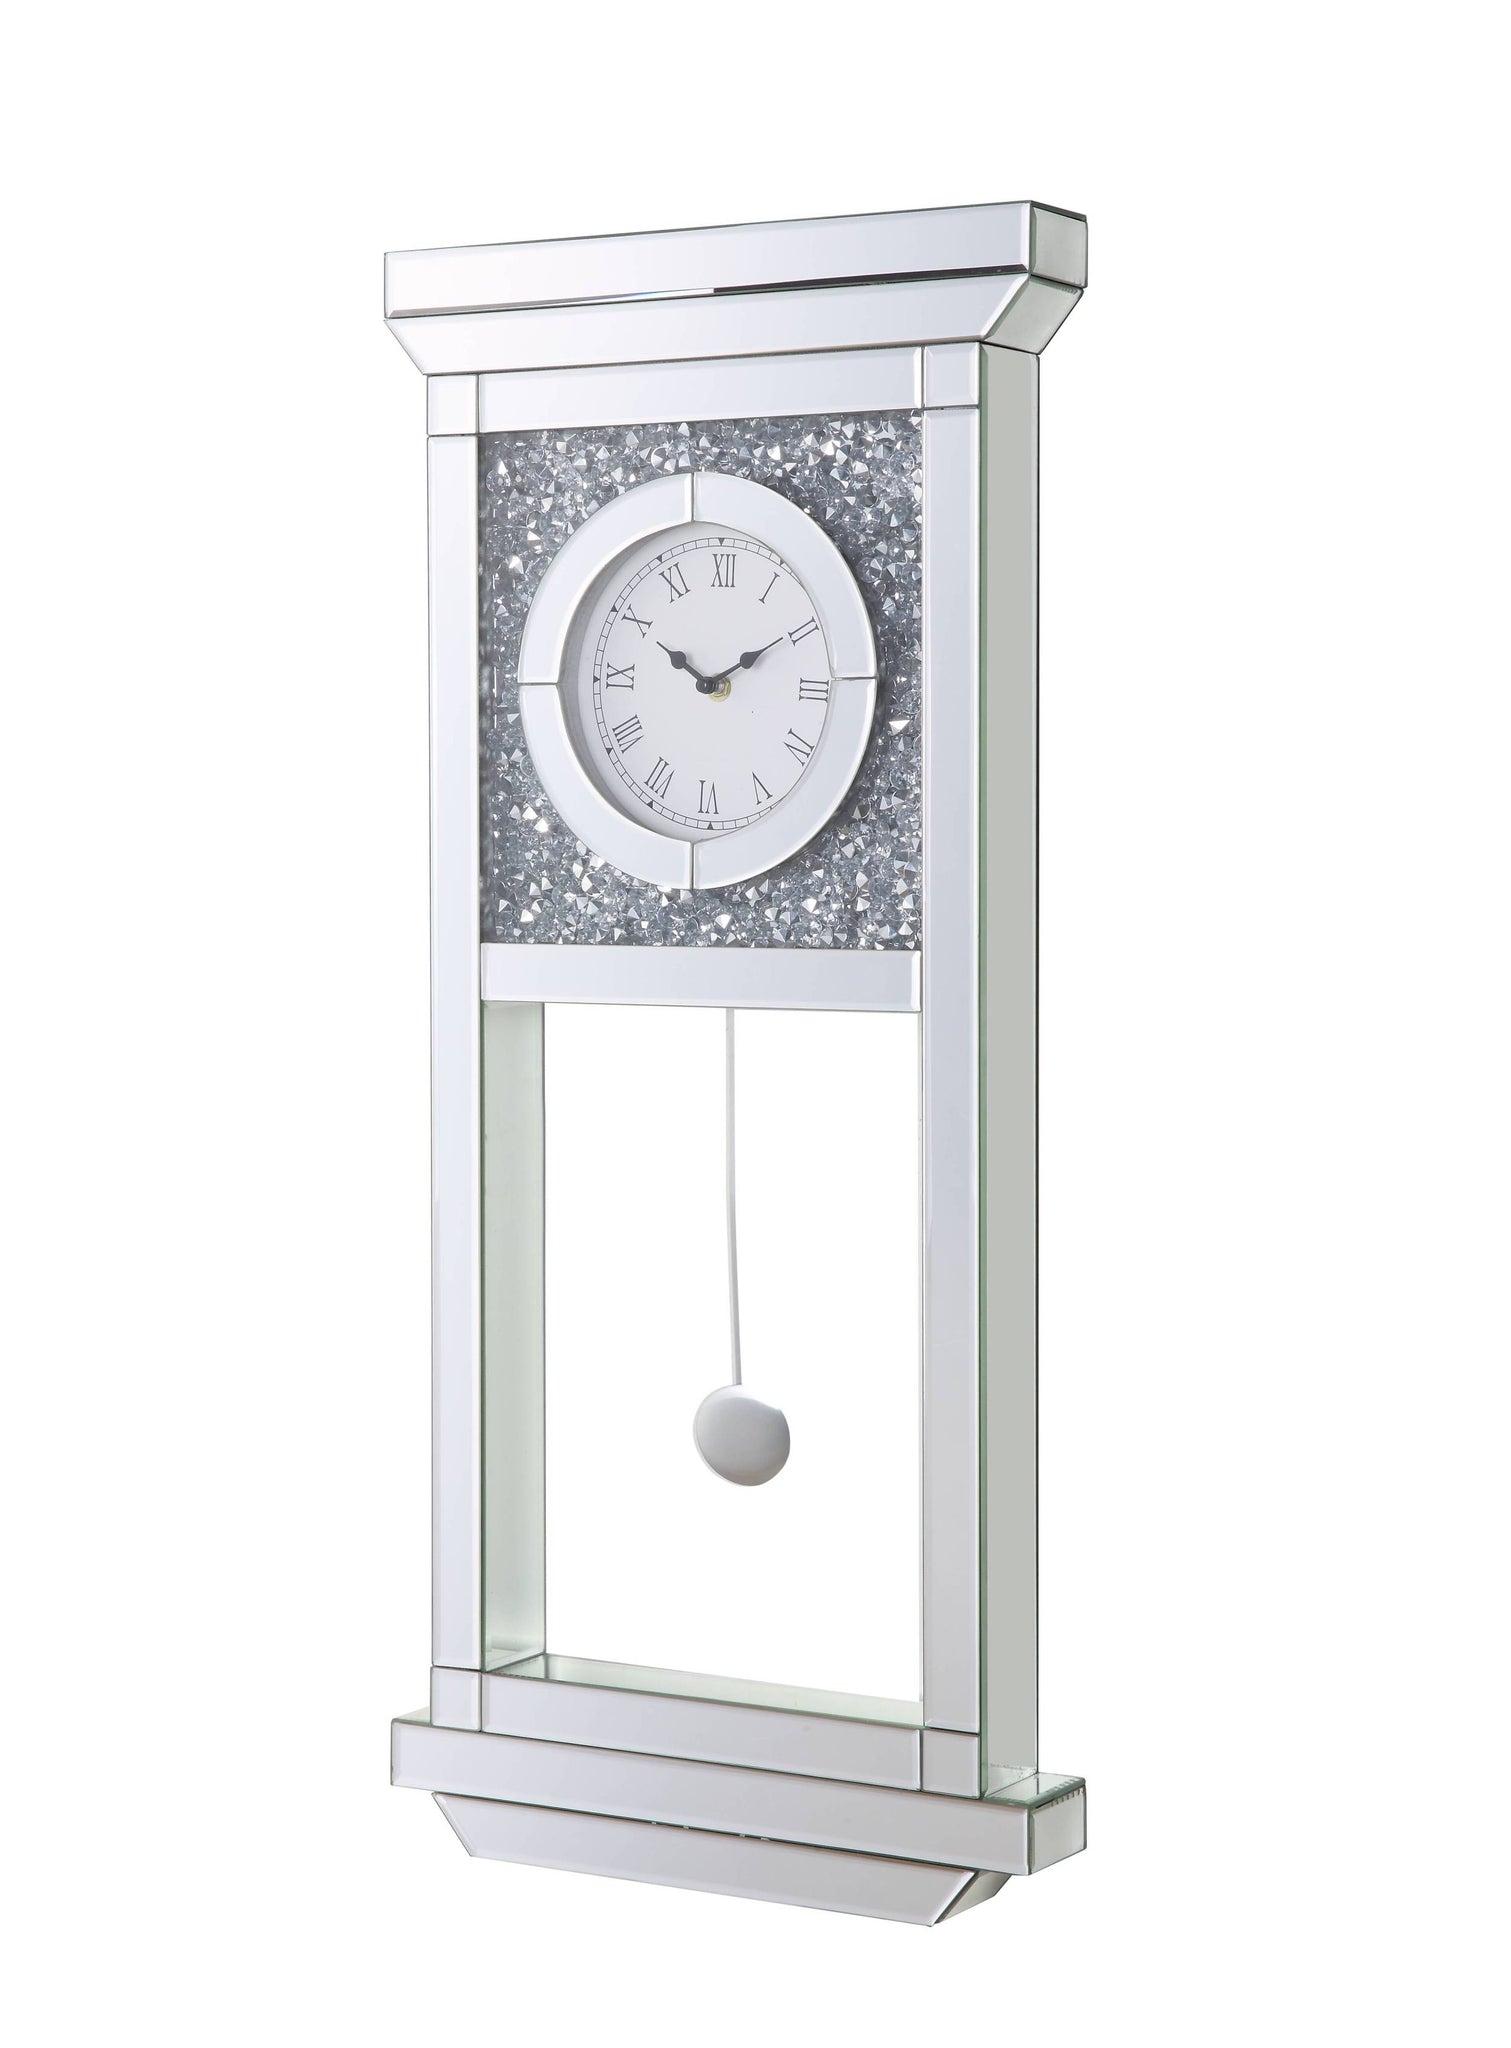 ACME Noralie WALL CLOCK Mirrored & Faux Diamonds silver-glass